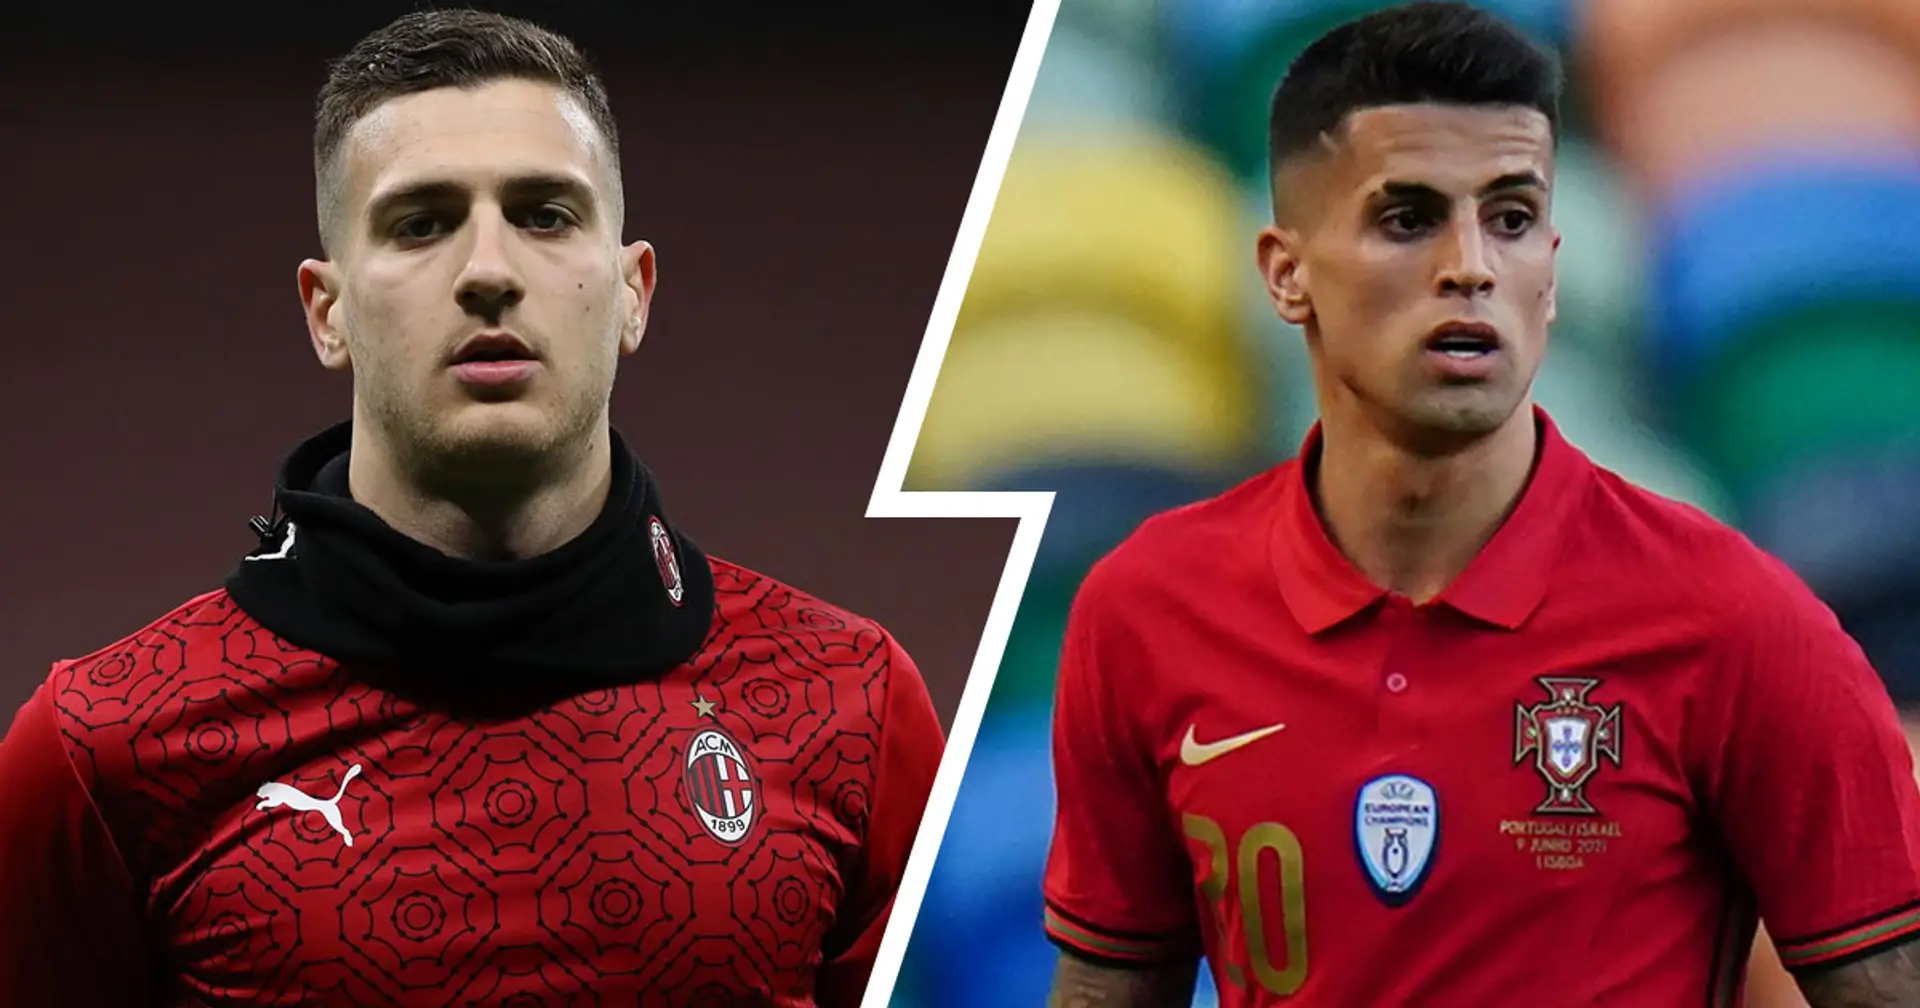 'It was a ridiculous episode': Dalot opens up on his surprising call-up to Portugal squad for Euro 2020